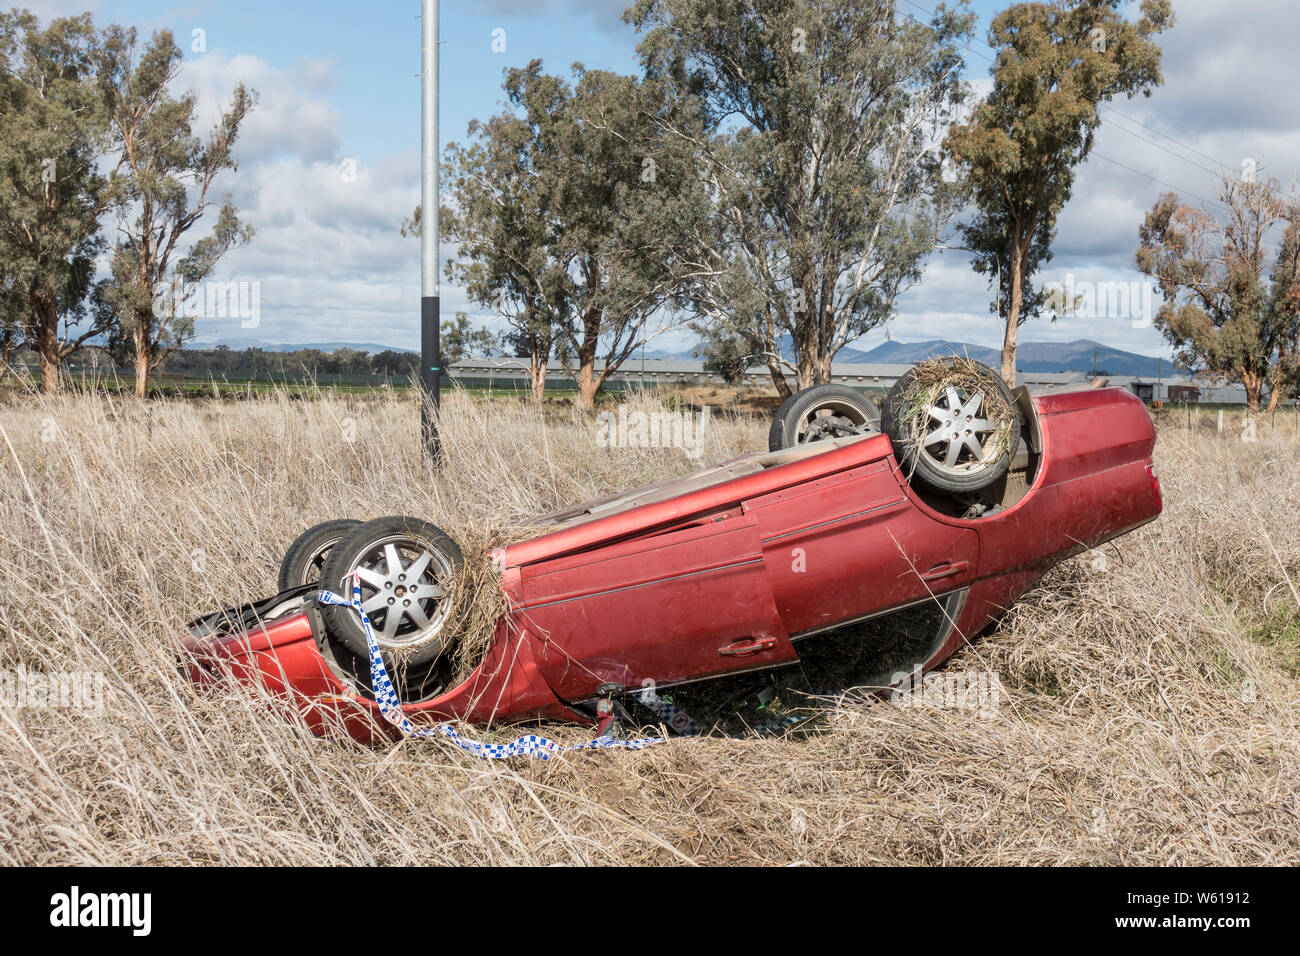 Red Mitsbishi Magna car in roll over crash on country road, Australia. Stock Photo